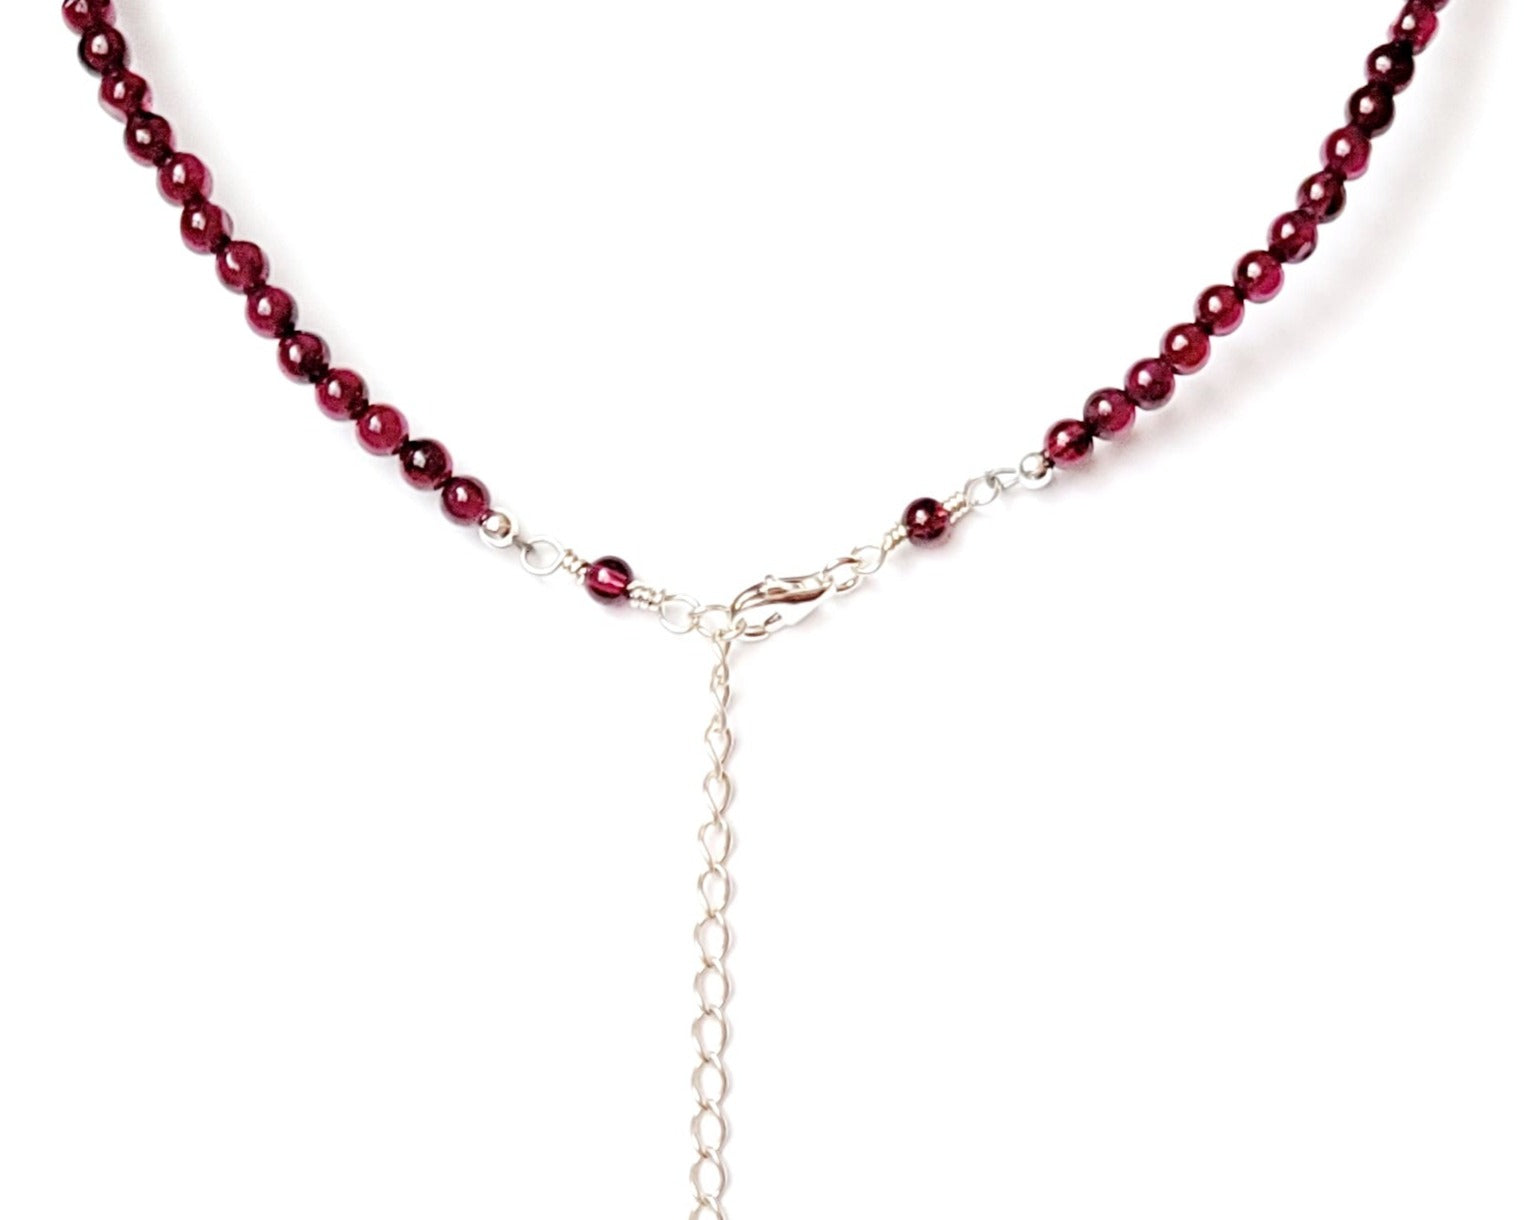 Celebration Garnet Moonstone Necklace with Moonstone Garnet Wire Wrapped Pendant in the center of a Deep Red Garnet Beaded Necklace